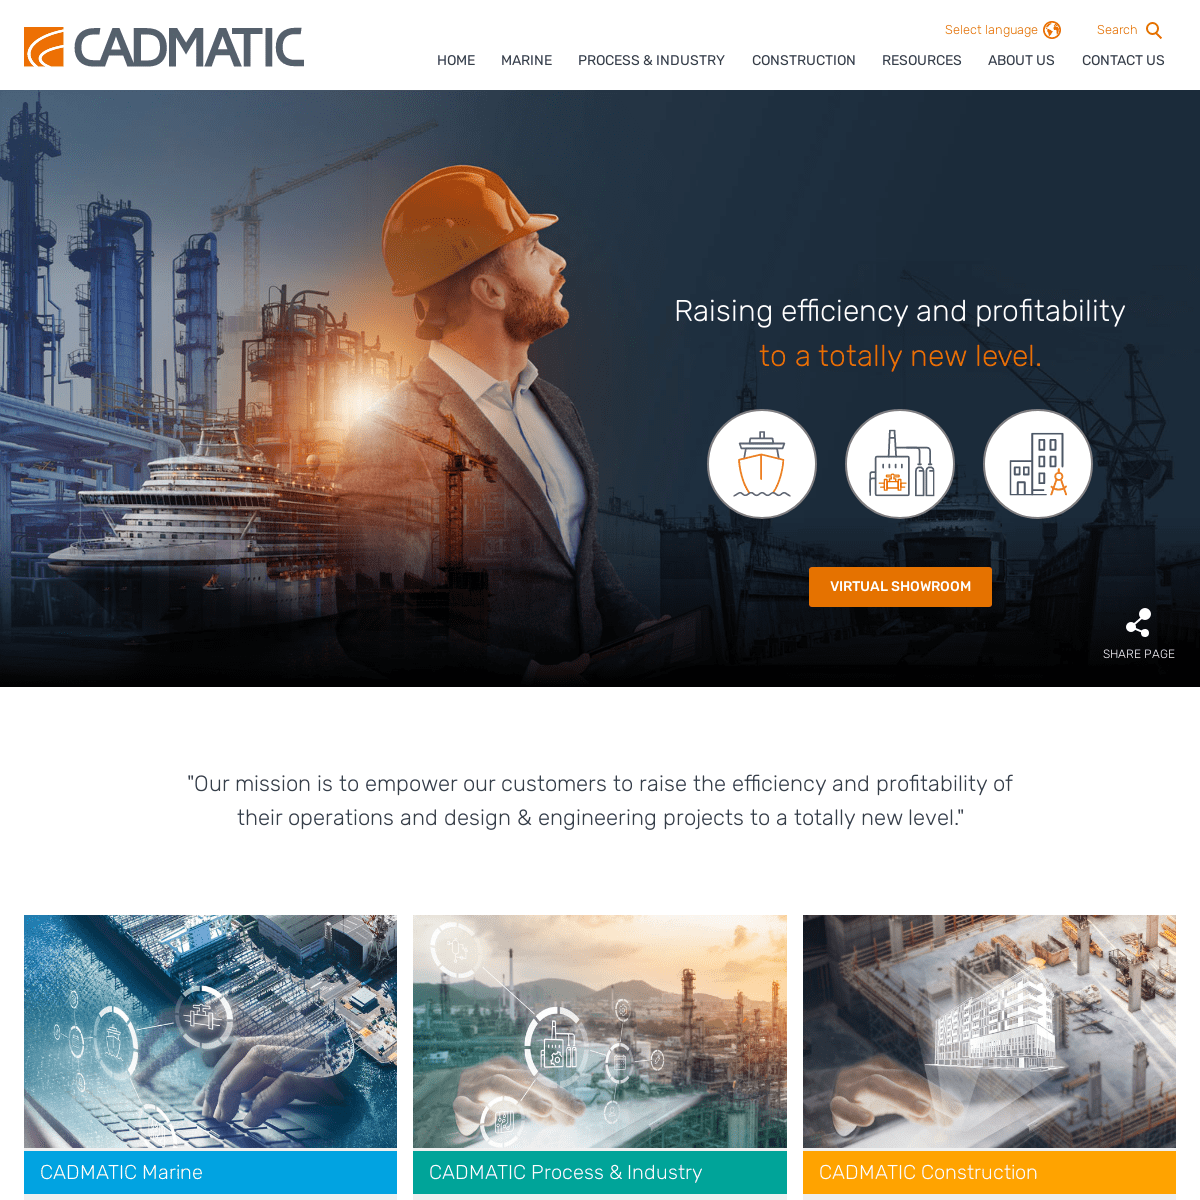 A complete backup of https://cadmatic.com